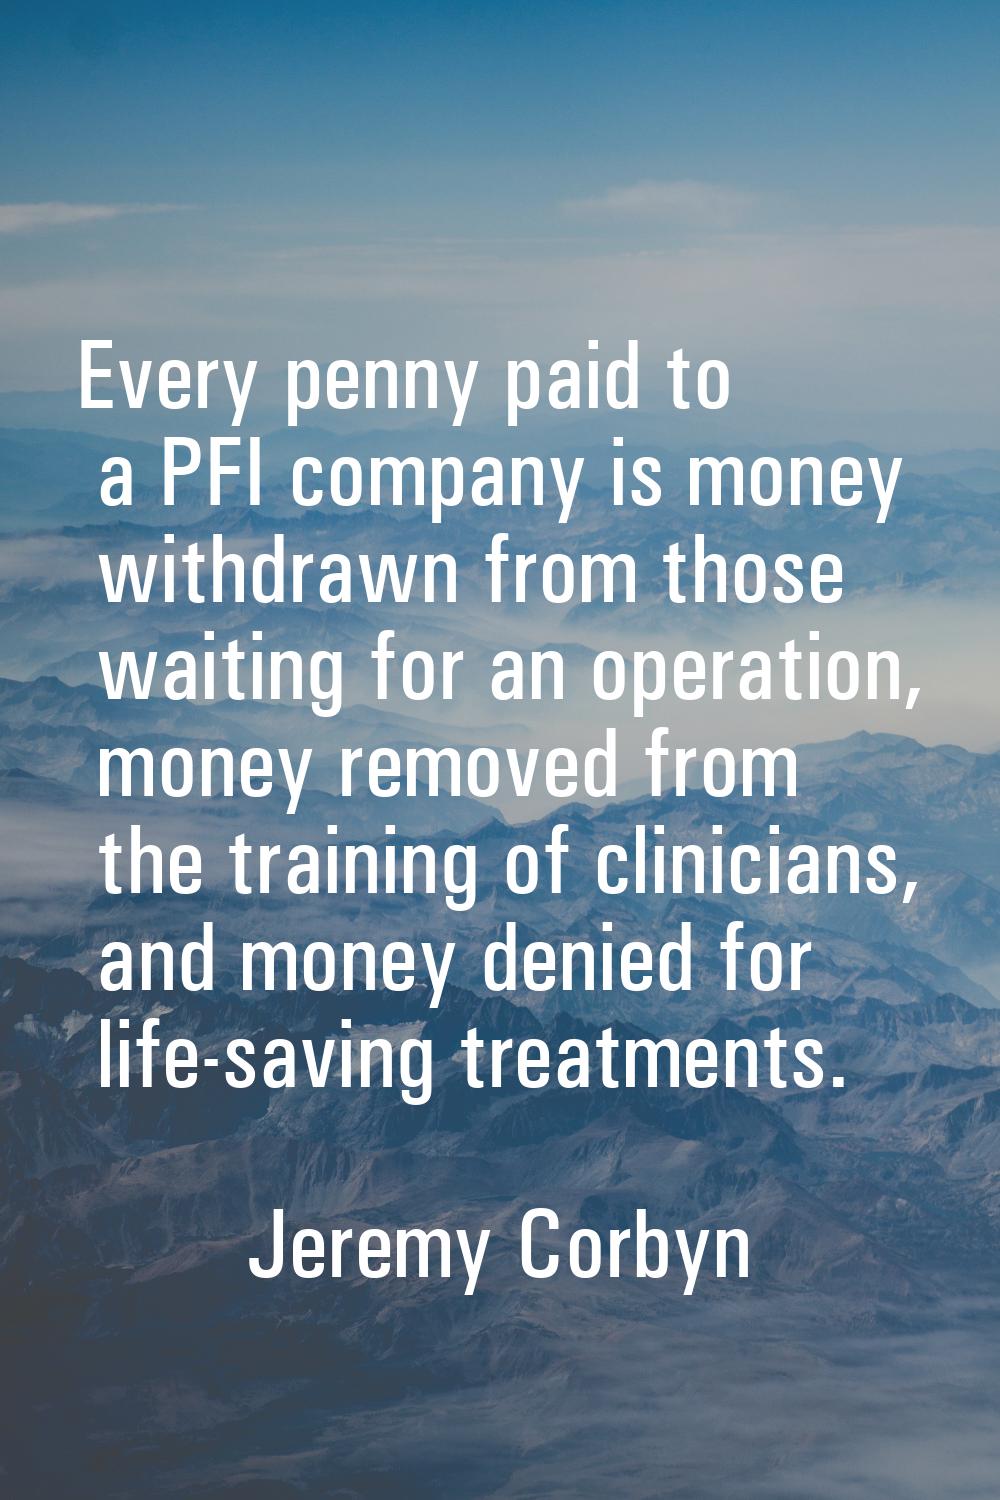 Every penny paid to a PFI company is money withdrawn from those waiting for an operation, money rem